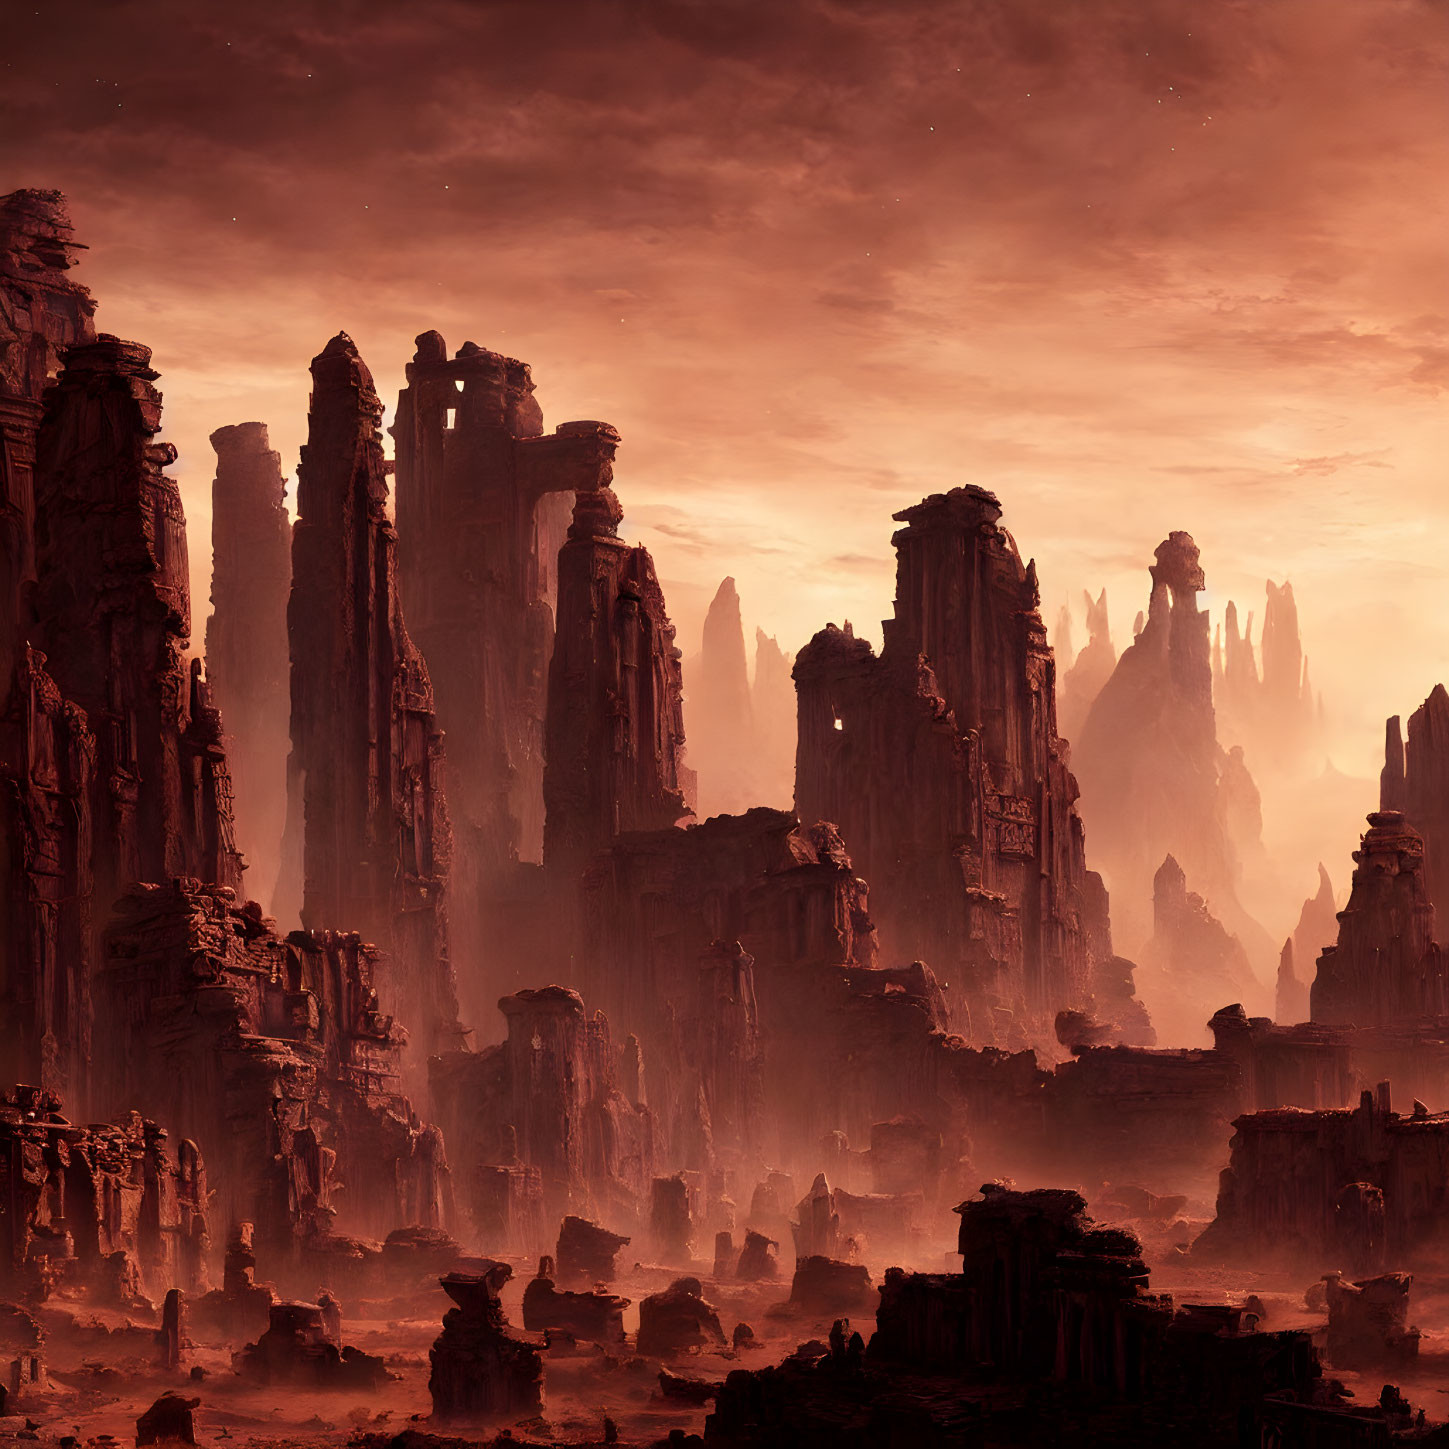 Dramatic alien landscape with towering rock formations under a reddish sky